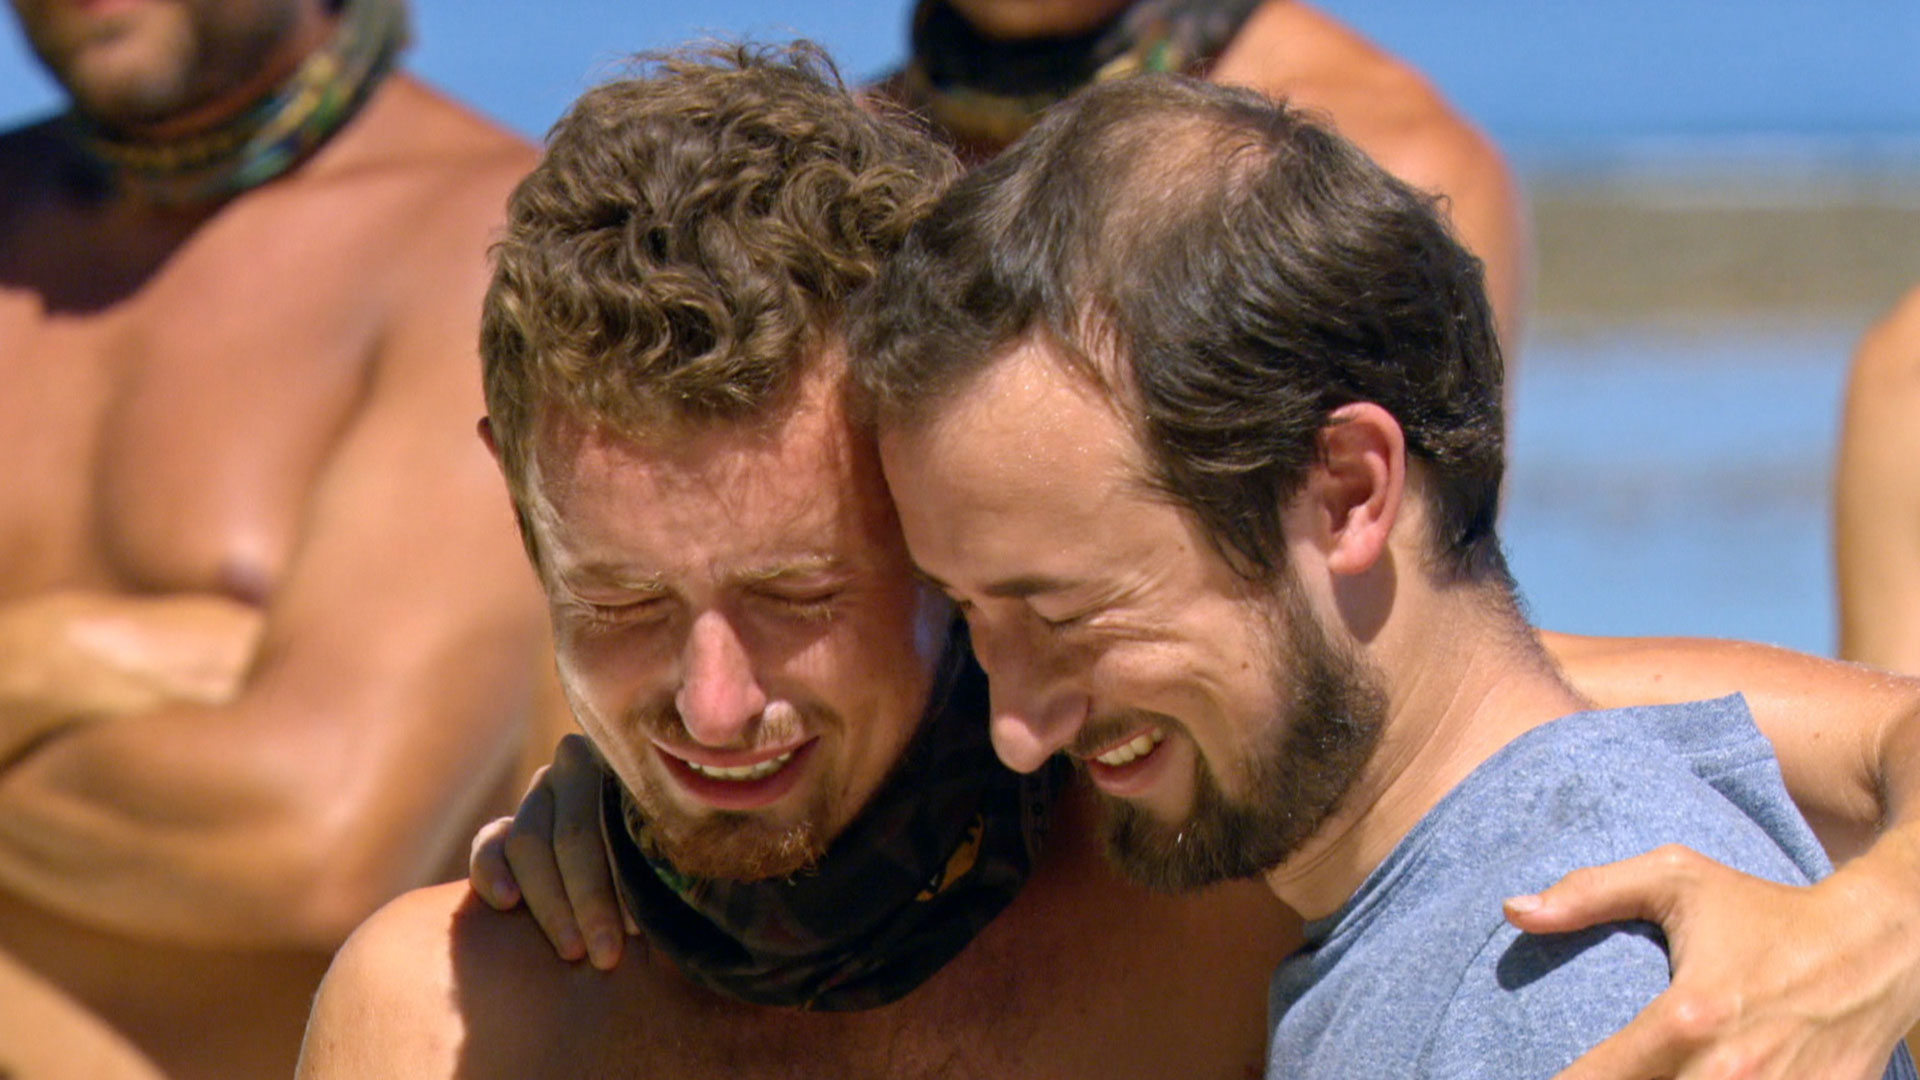 Season 33: Adam Klein is reunited with his brother.